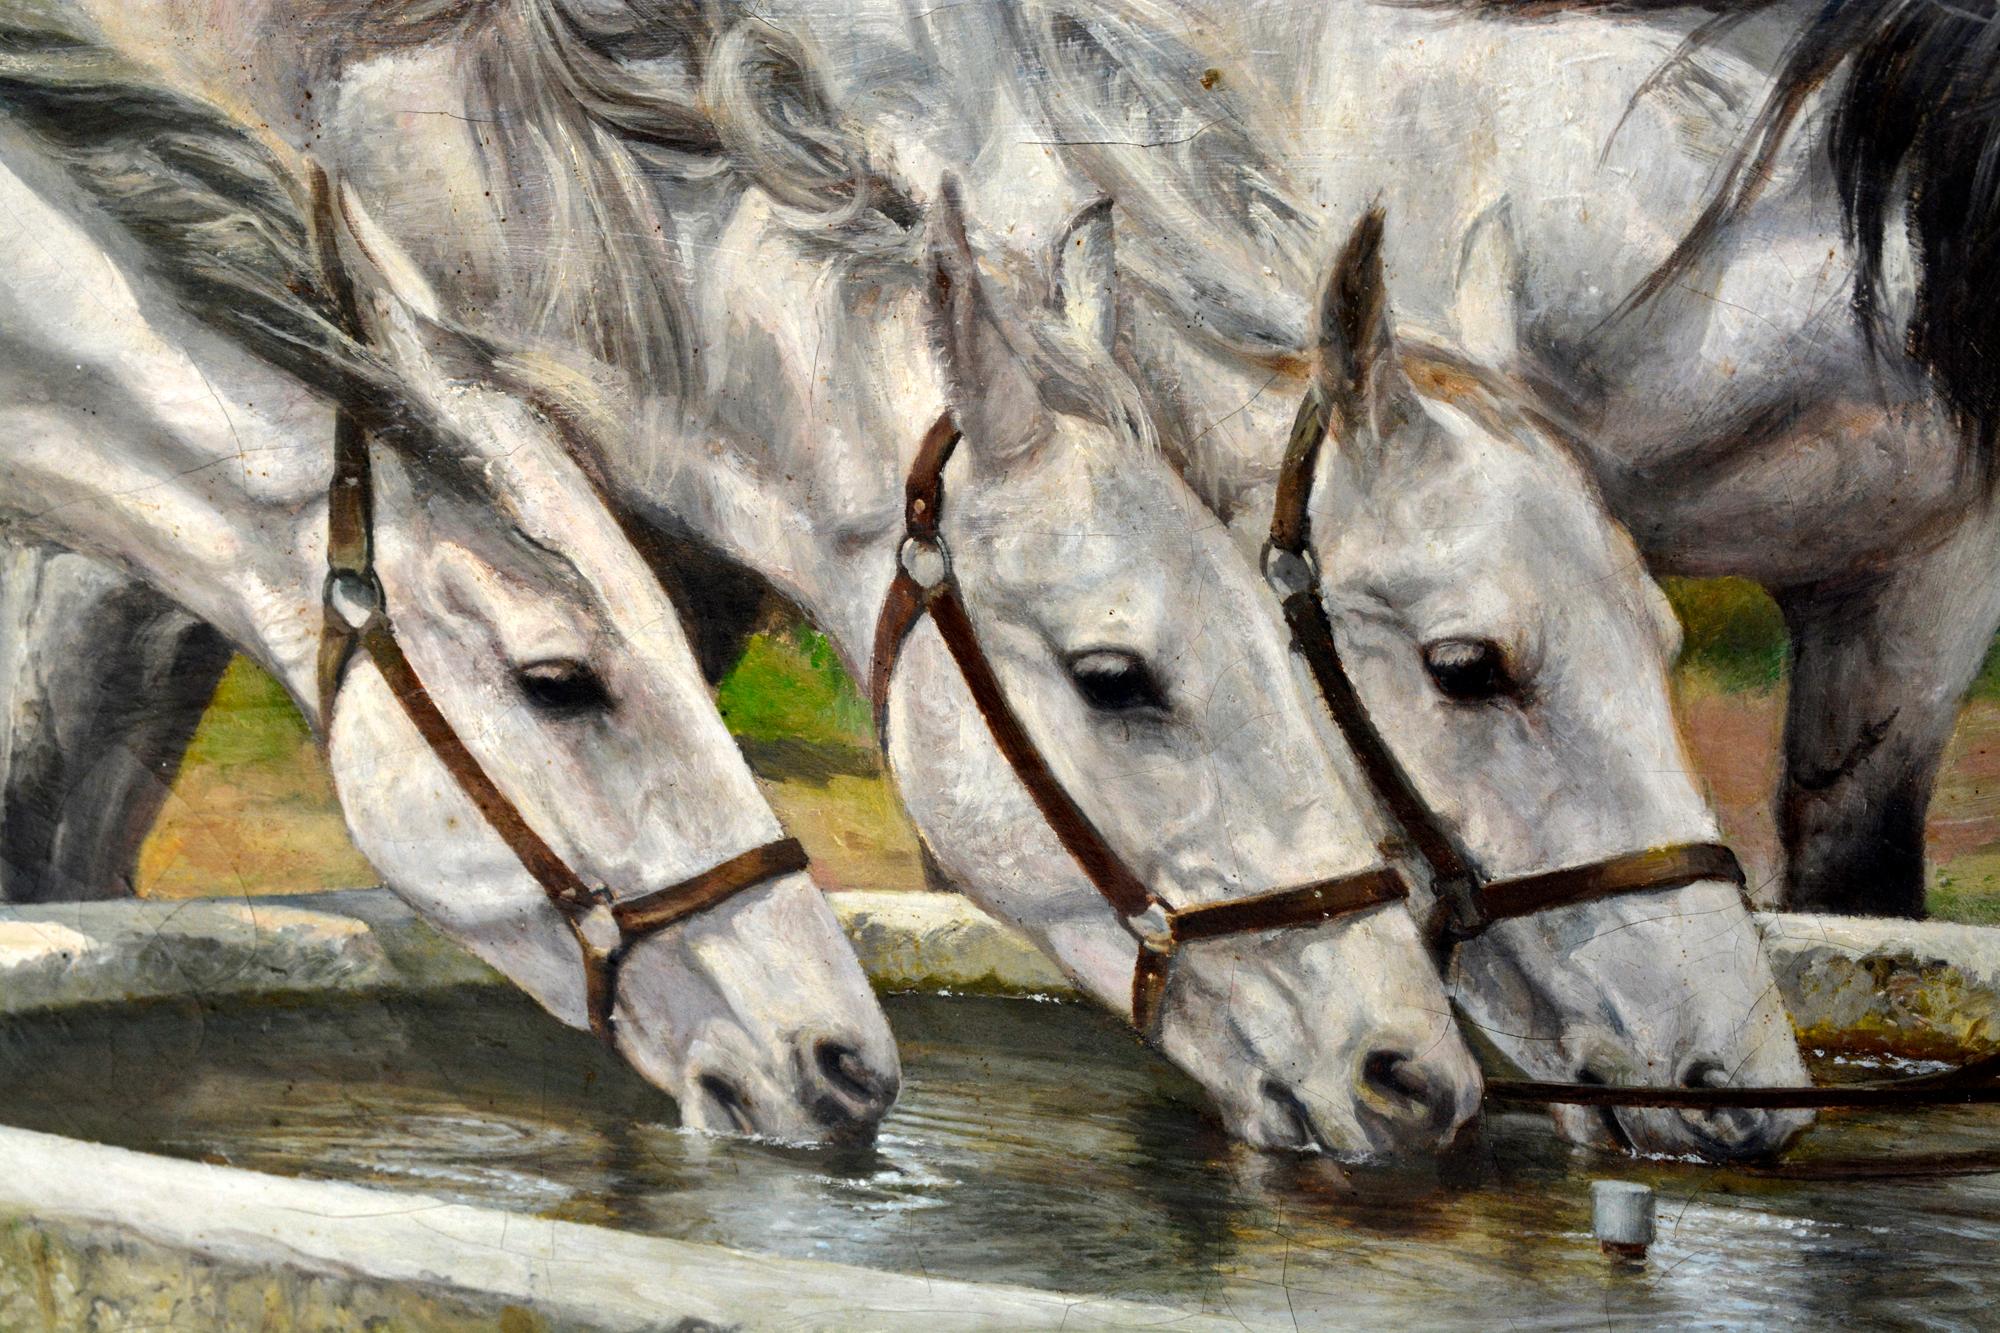 Gustave-Alphonse Demarle, Camargue Horses at the Watering Trough, dated 1947. Oil on canvas. Signed: 